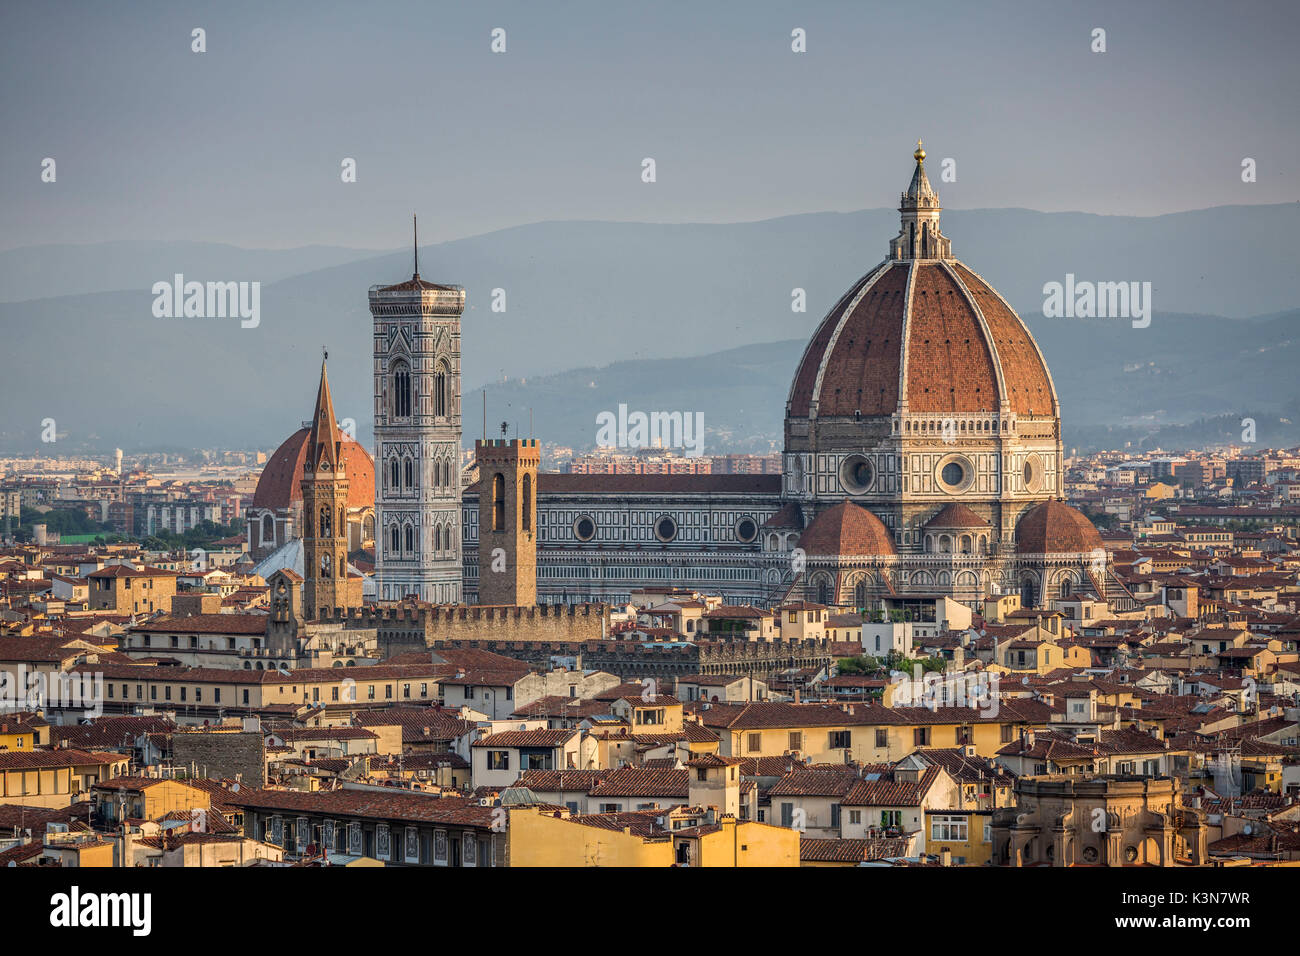 Santa Maria del Fiore cathedral in Florence, Tuscany, Italy. Stock Photo